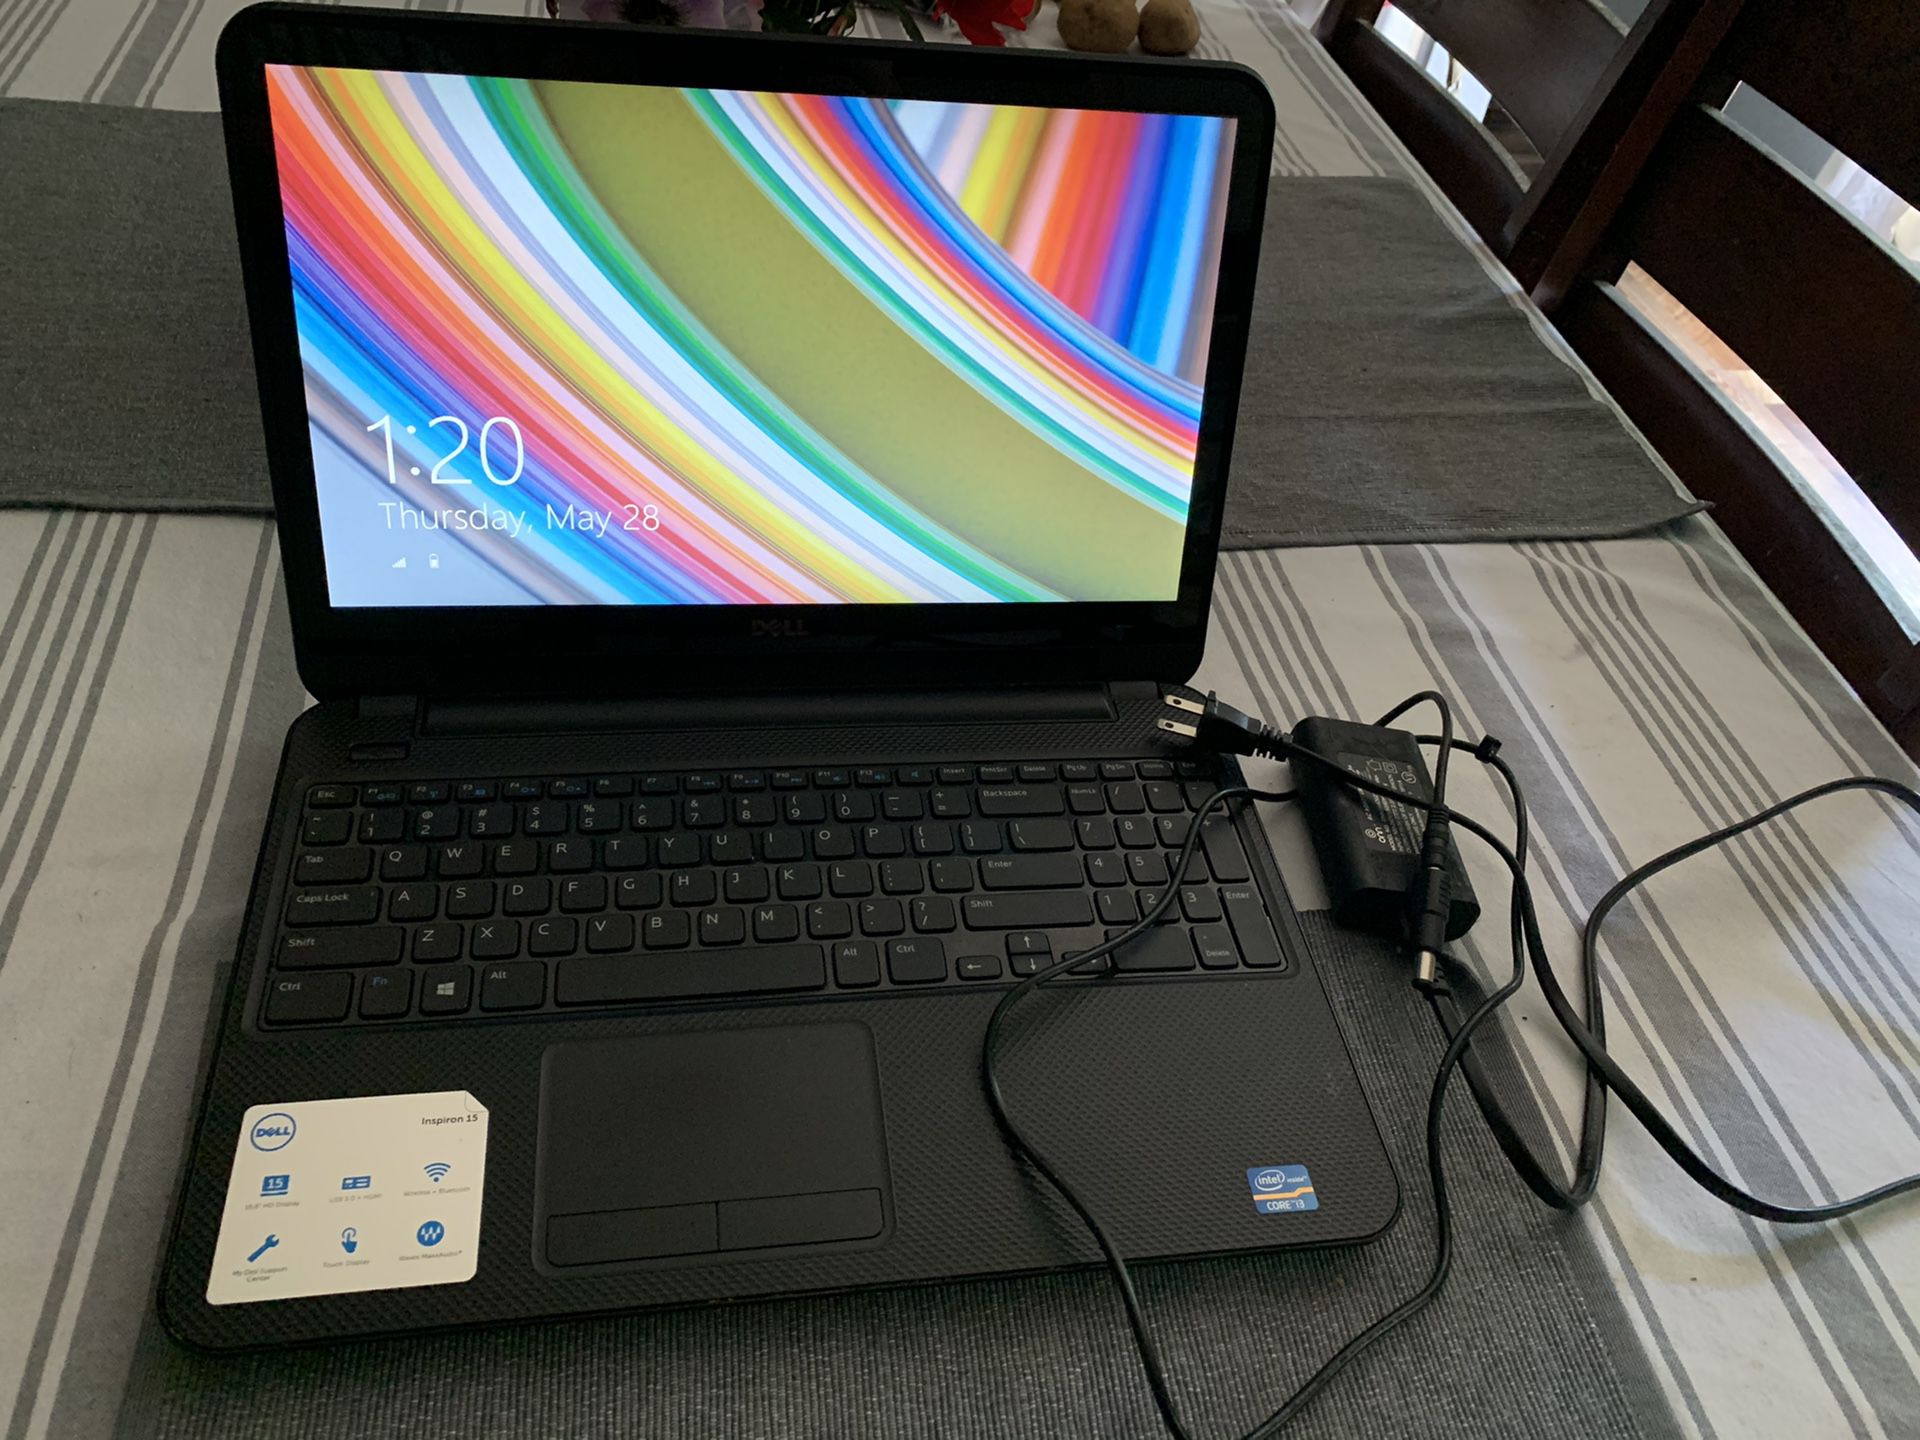 Dell Inspiron 15 touch-screen laptop computer